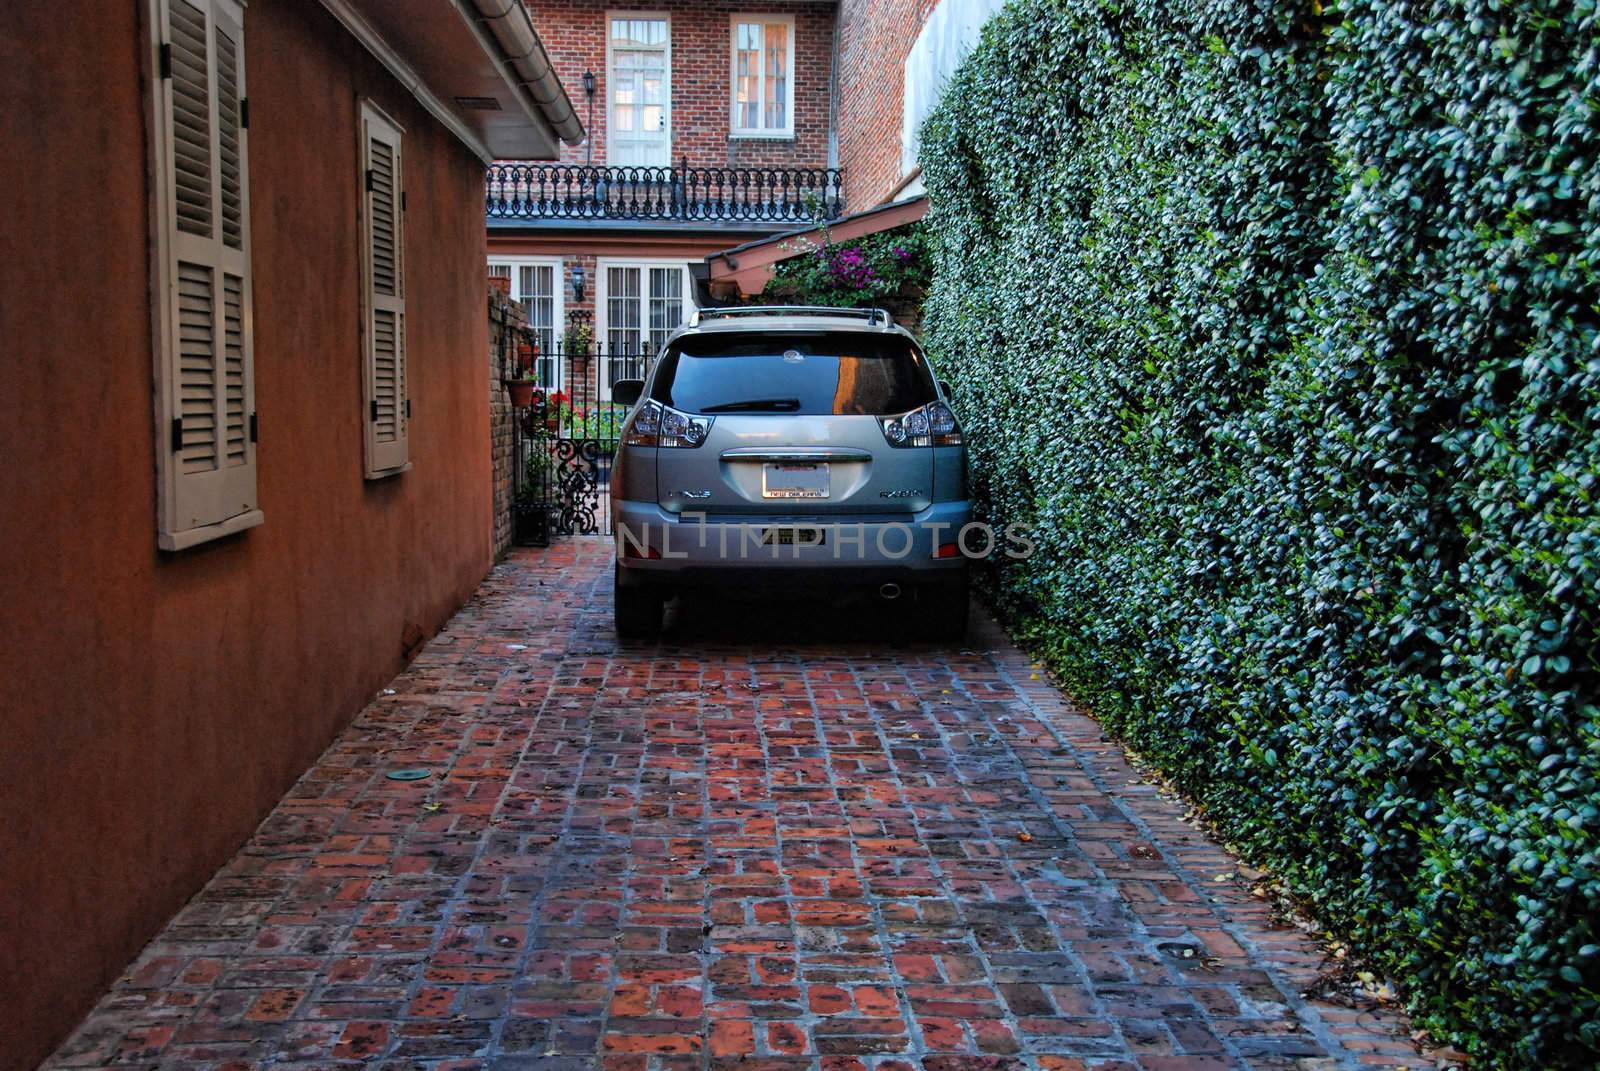 Parking in New Orleans, Louisiana by jovannig